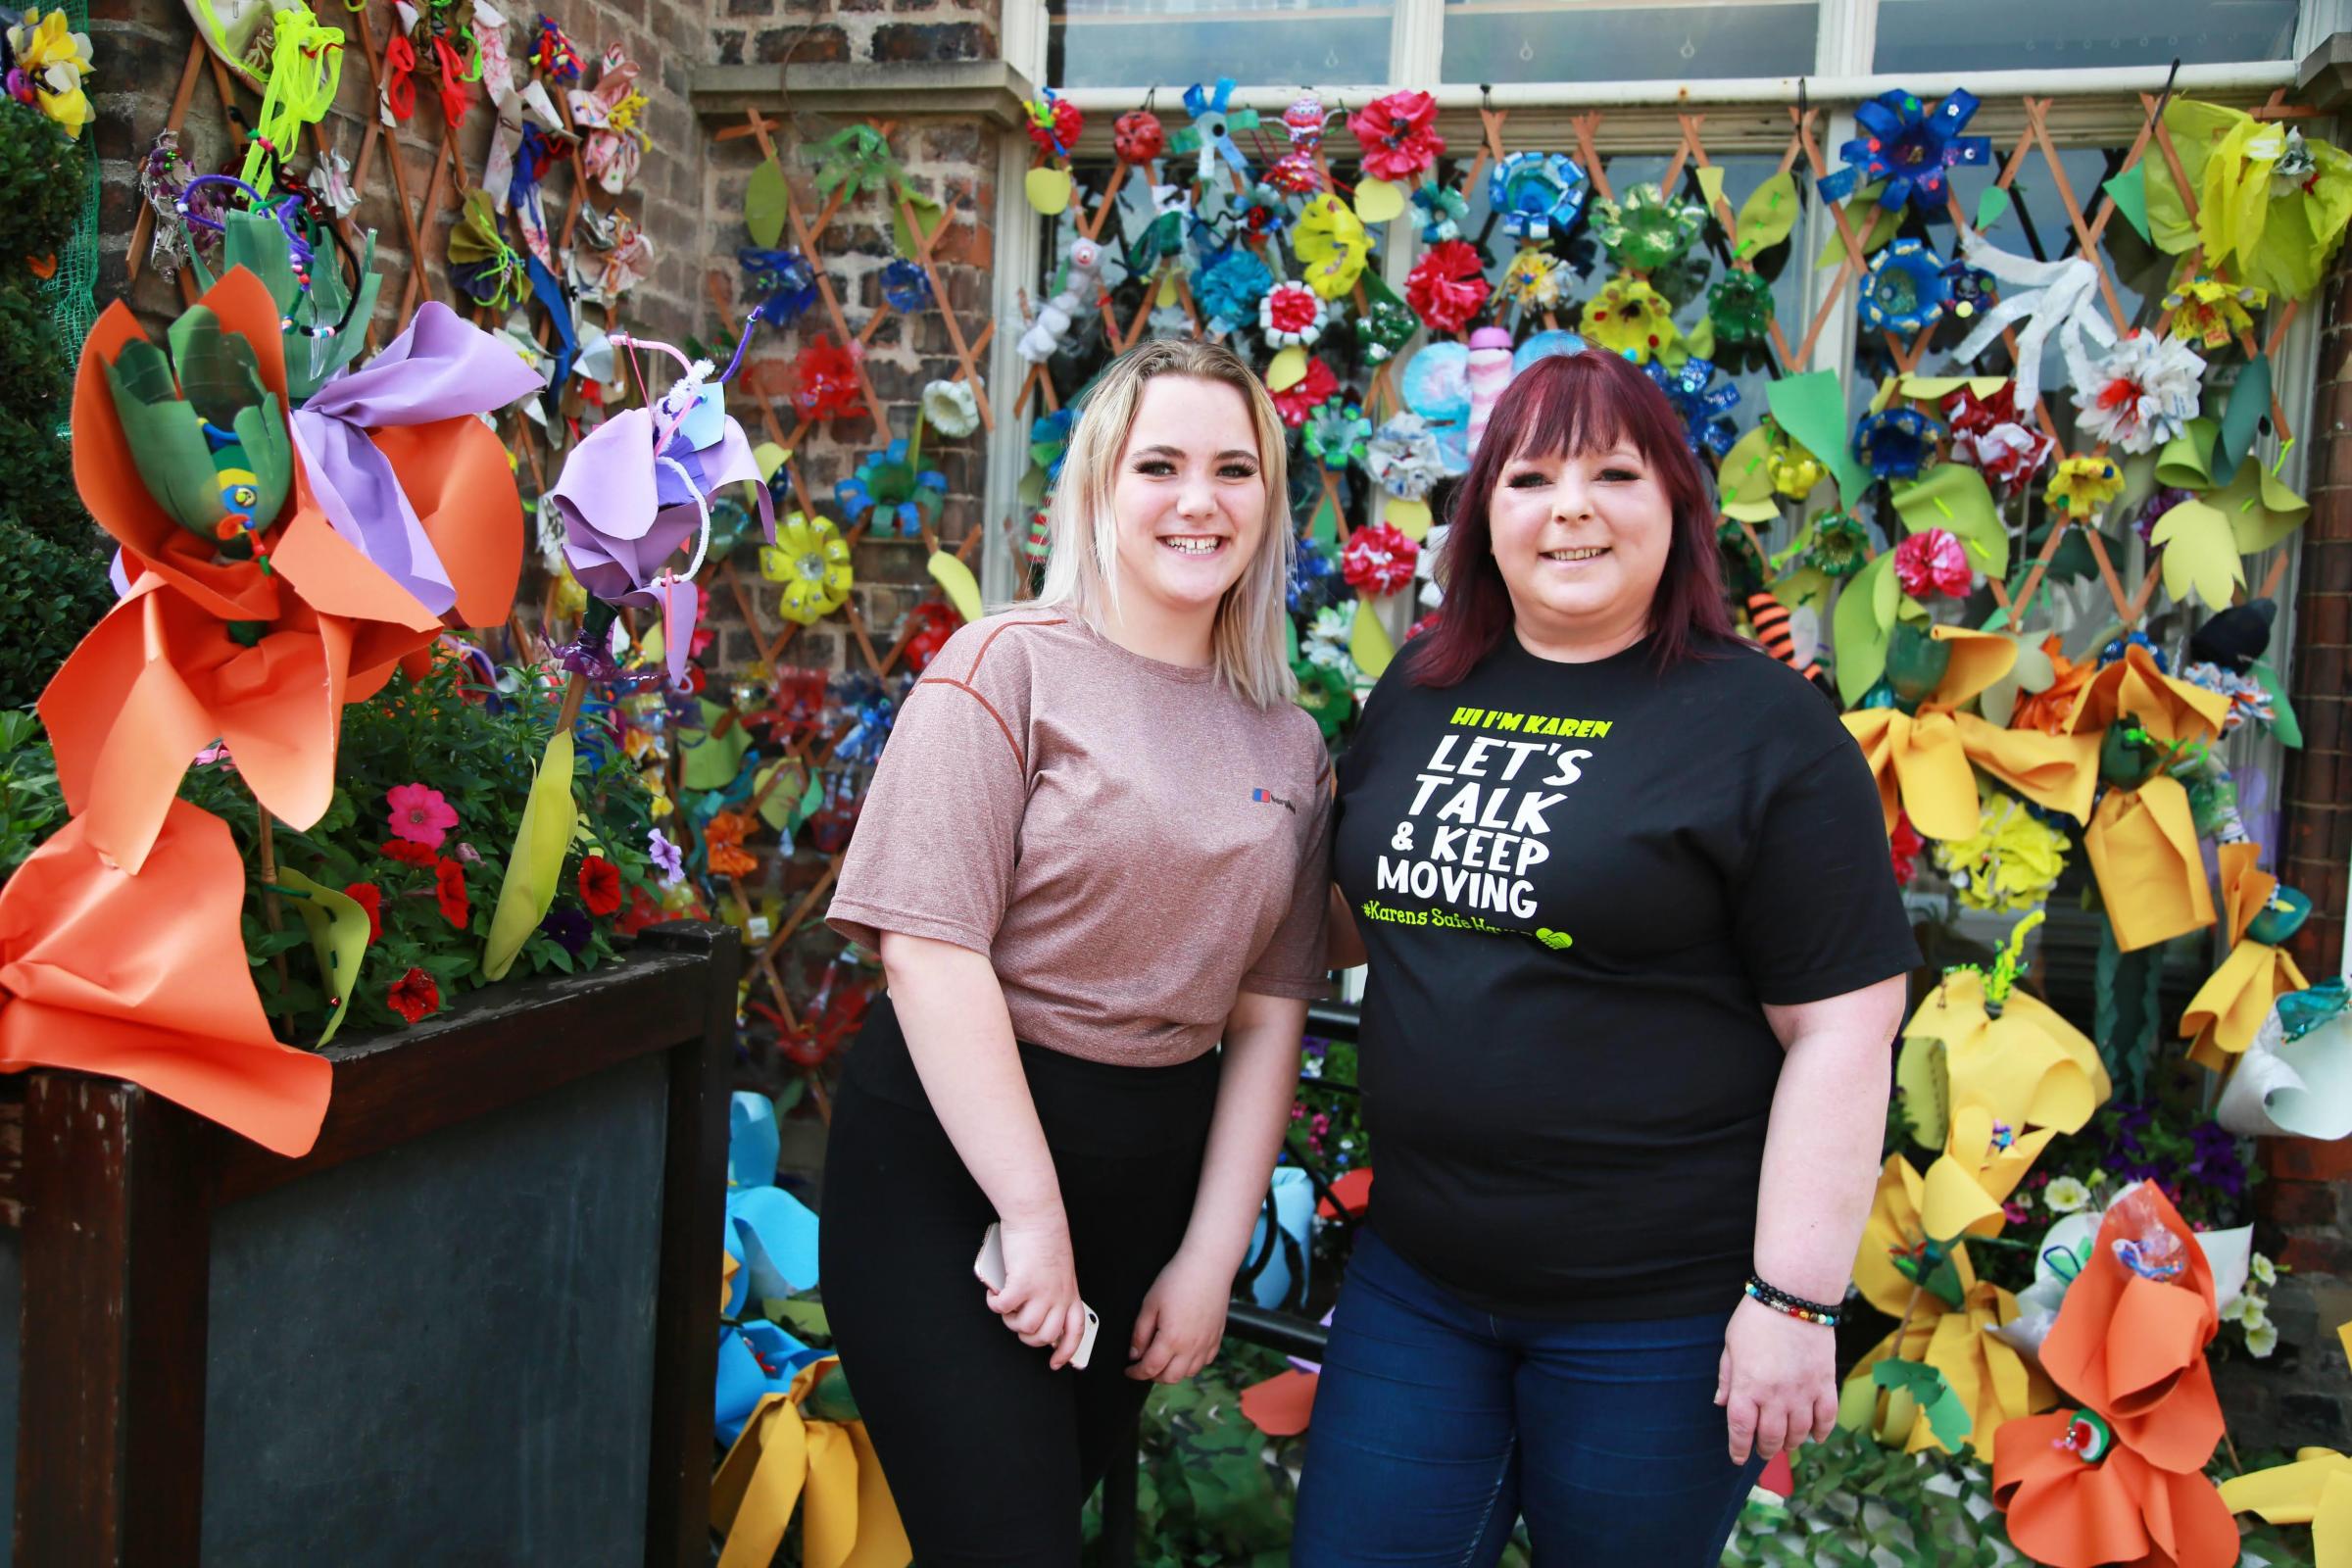 Karen Bentham set up a mental health support group on line called Karens Safe Haven to help people going through difficulties Picture: SARAH CALDECOTT